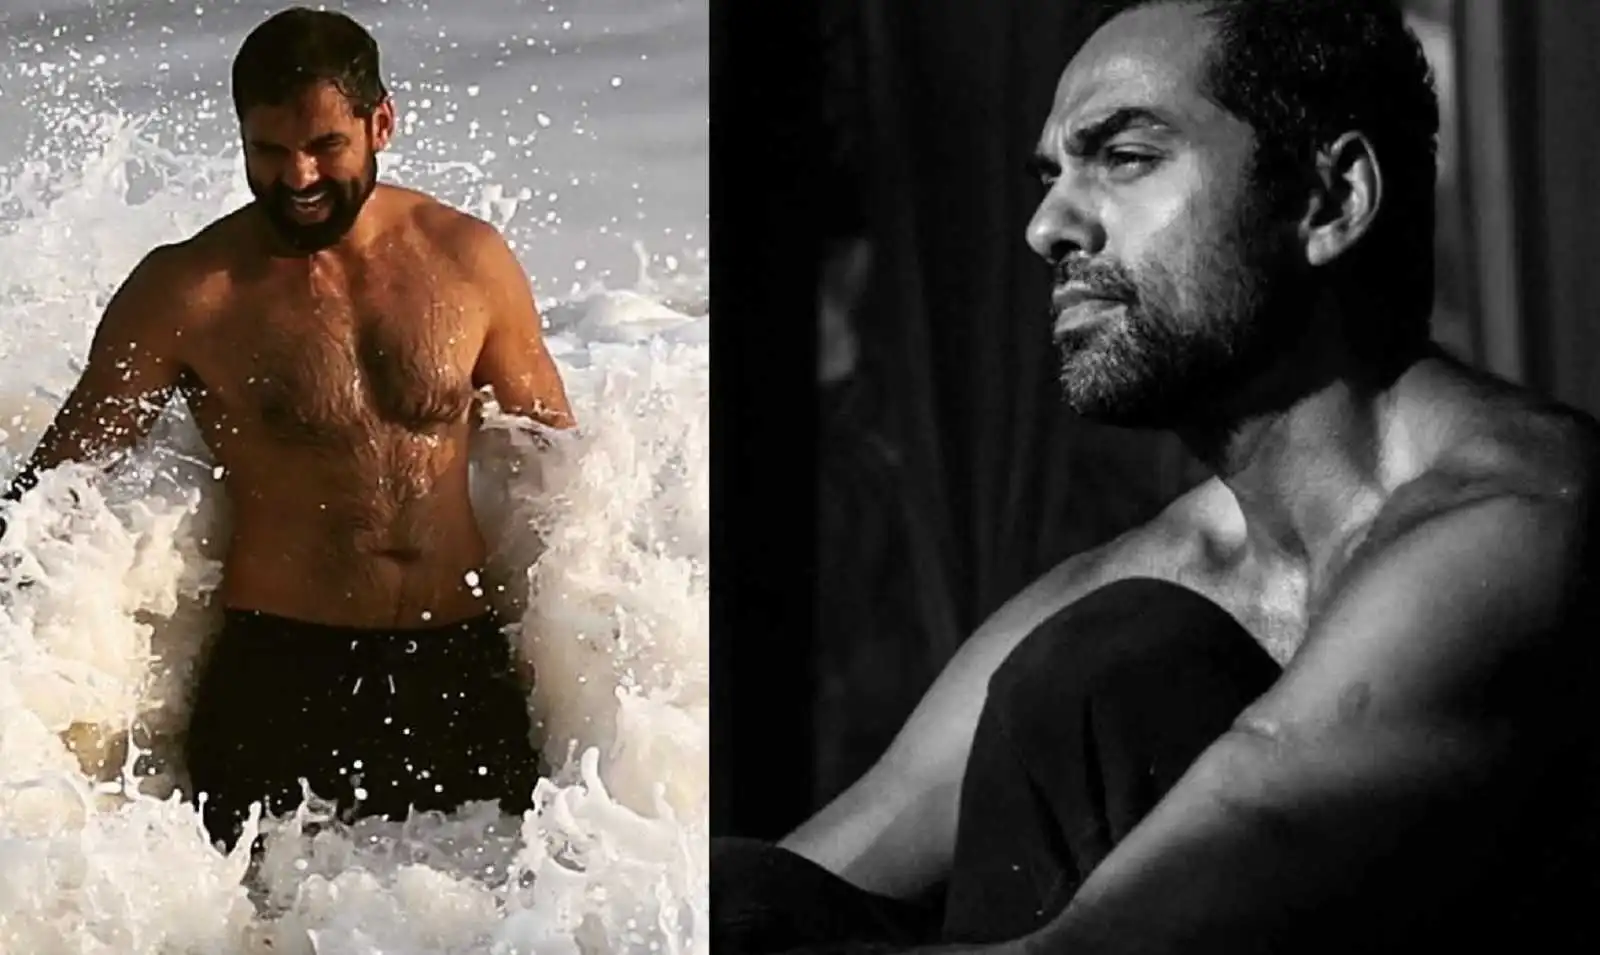 Hotness Alert! Thirst trap photos of Trial By Fire star Abhay Deol which will make you blush